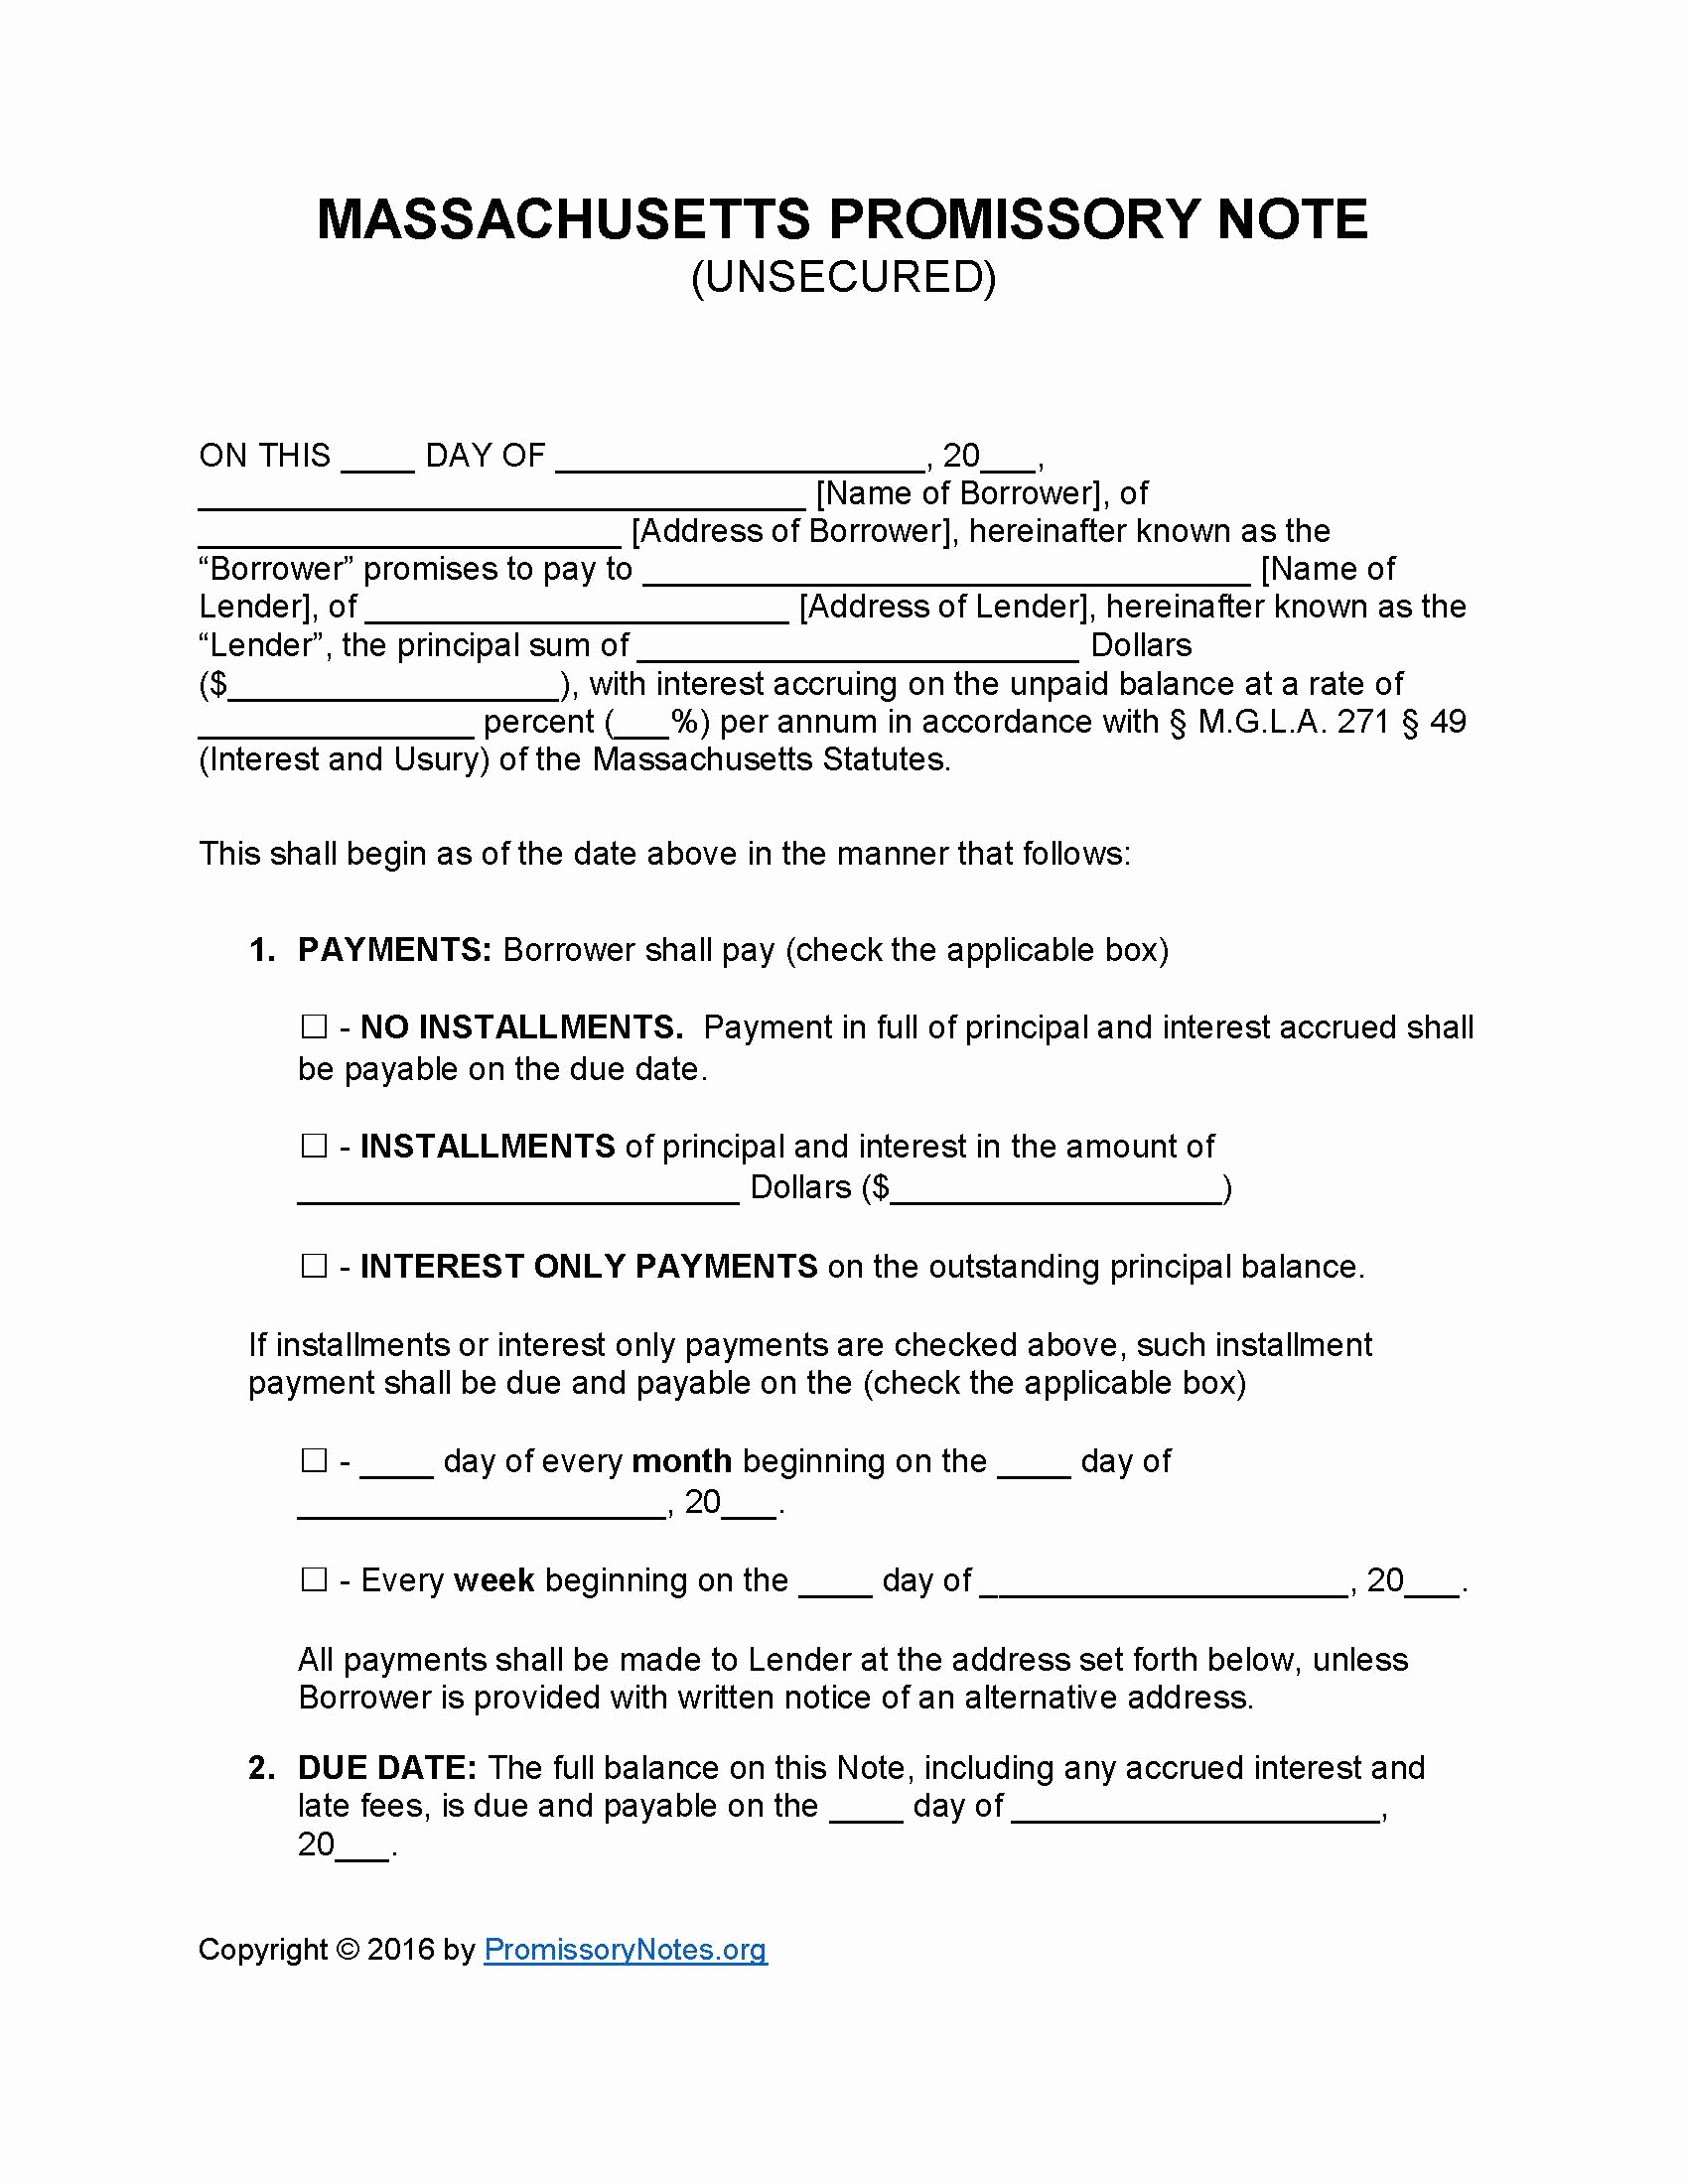 massachusetts unsecured promissory note template